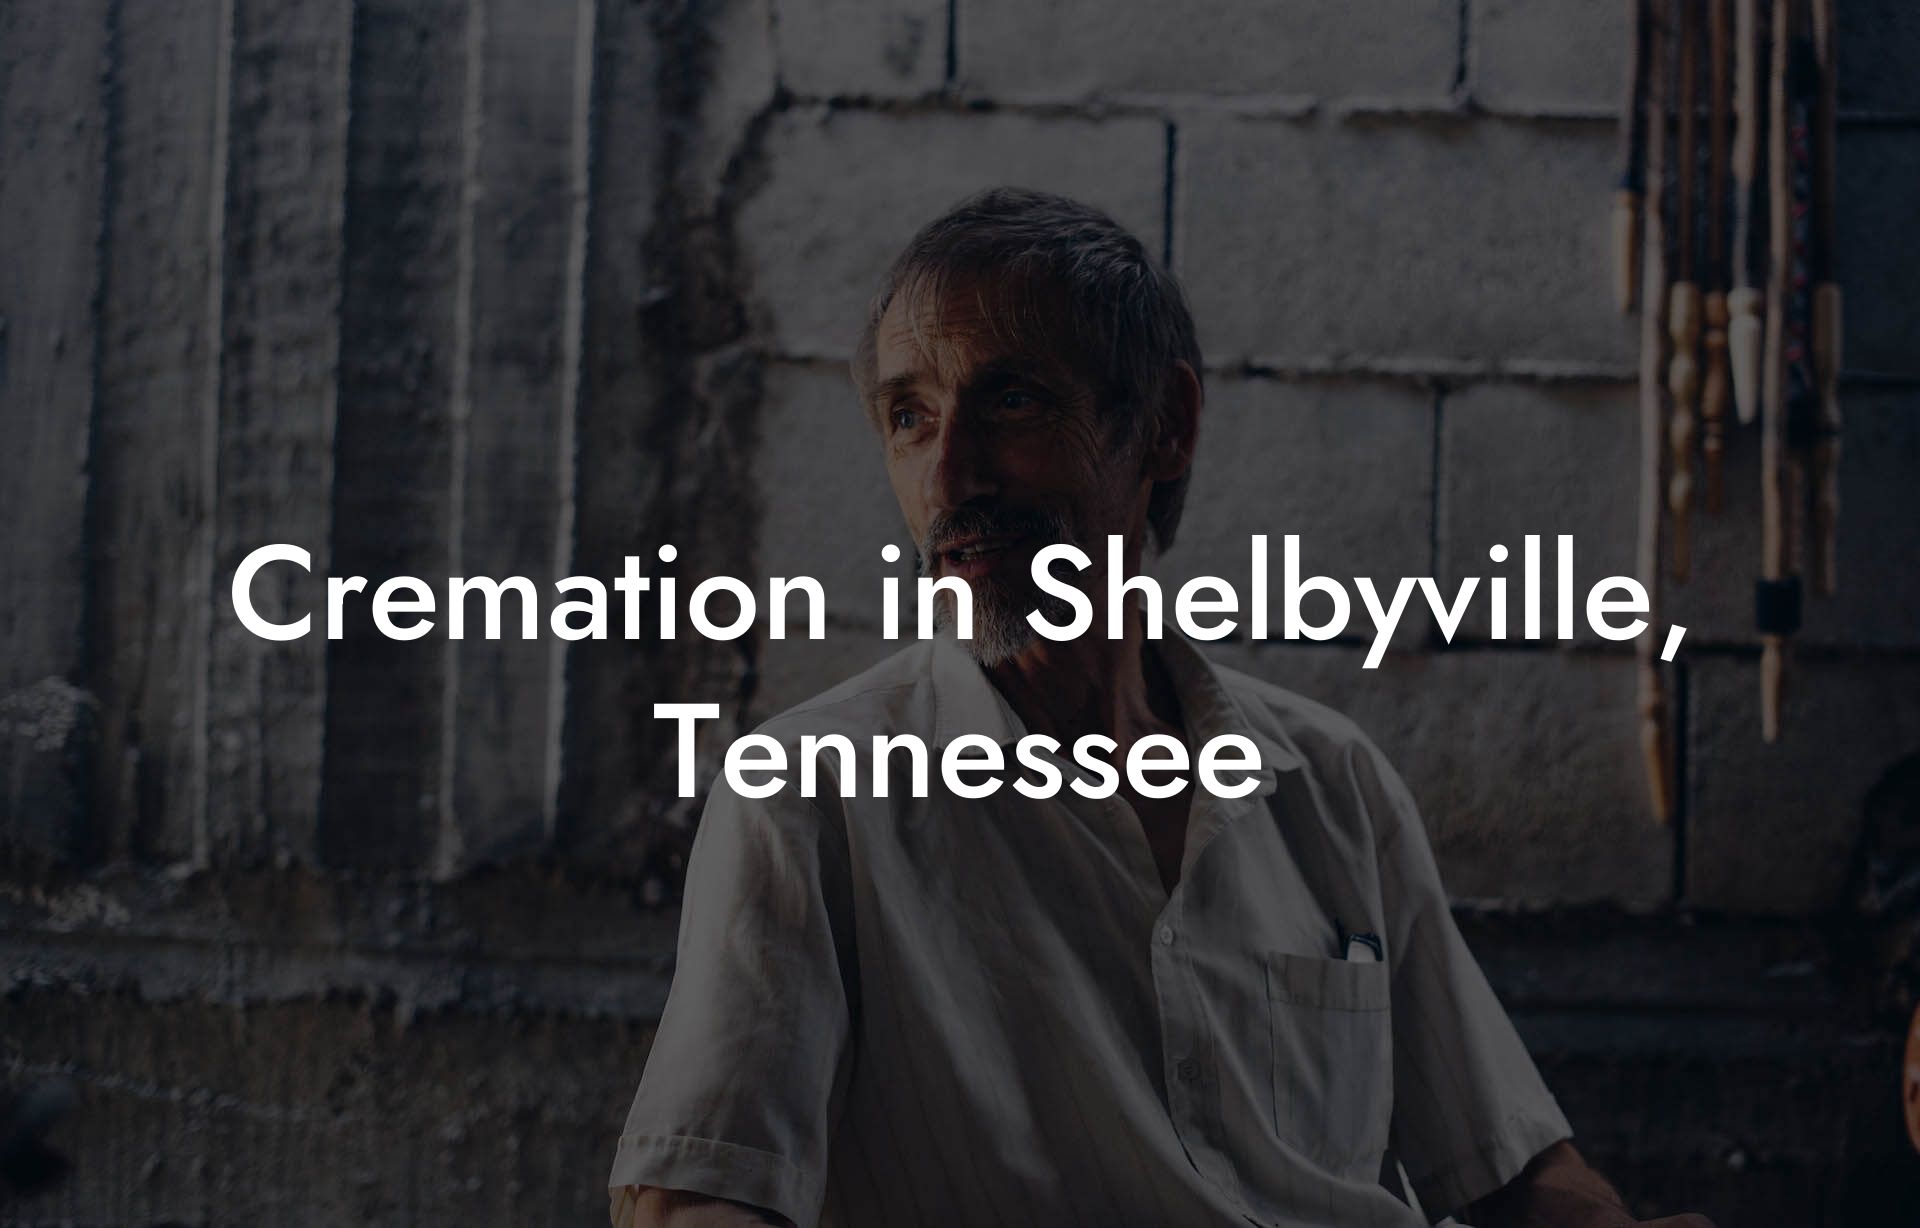 Cremation in Shelbyville, Tennessee